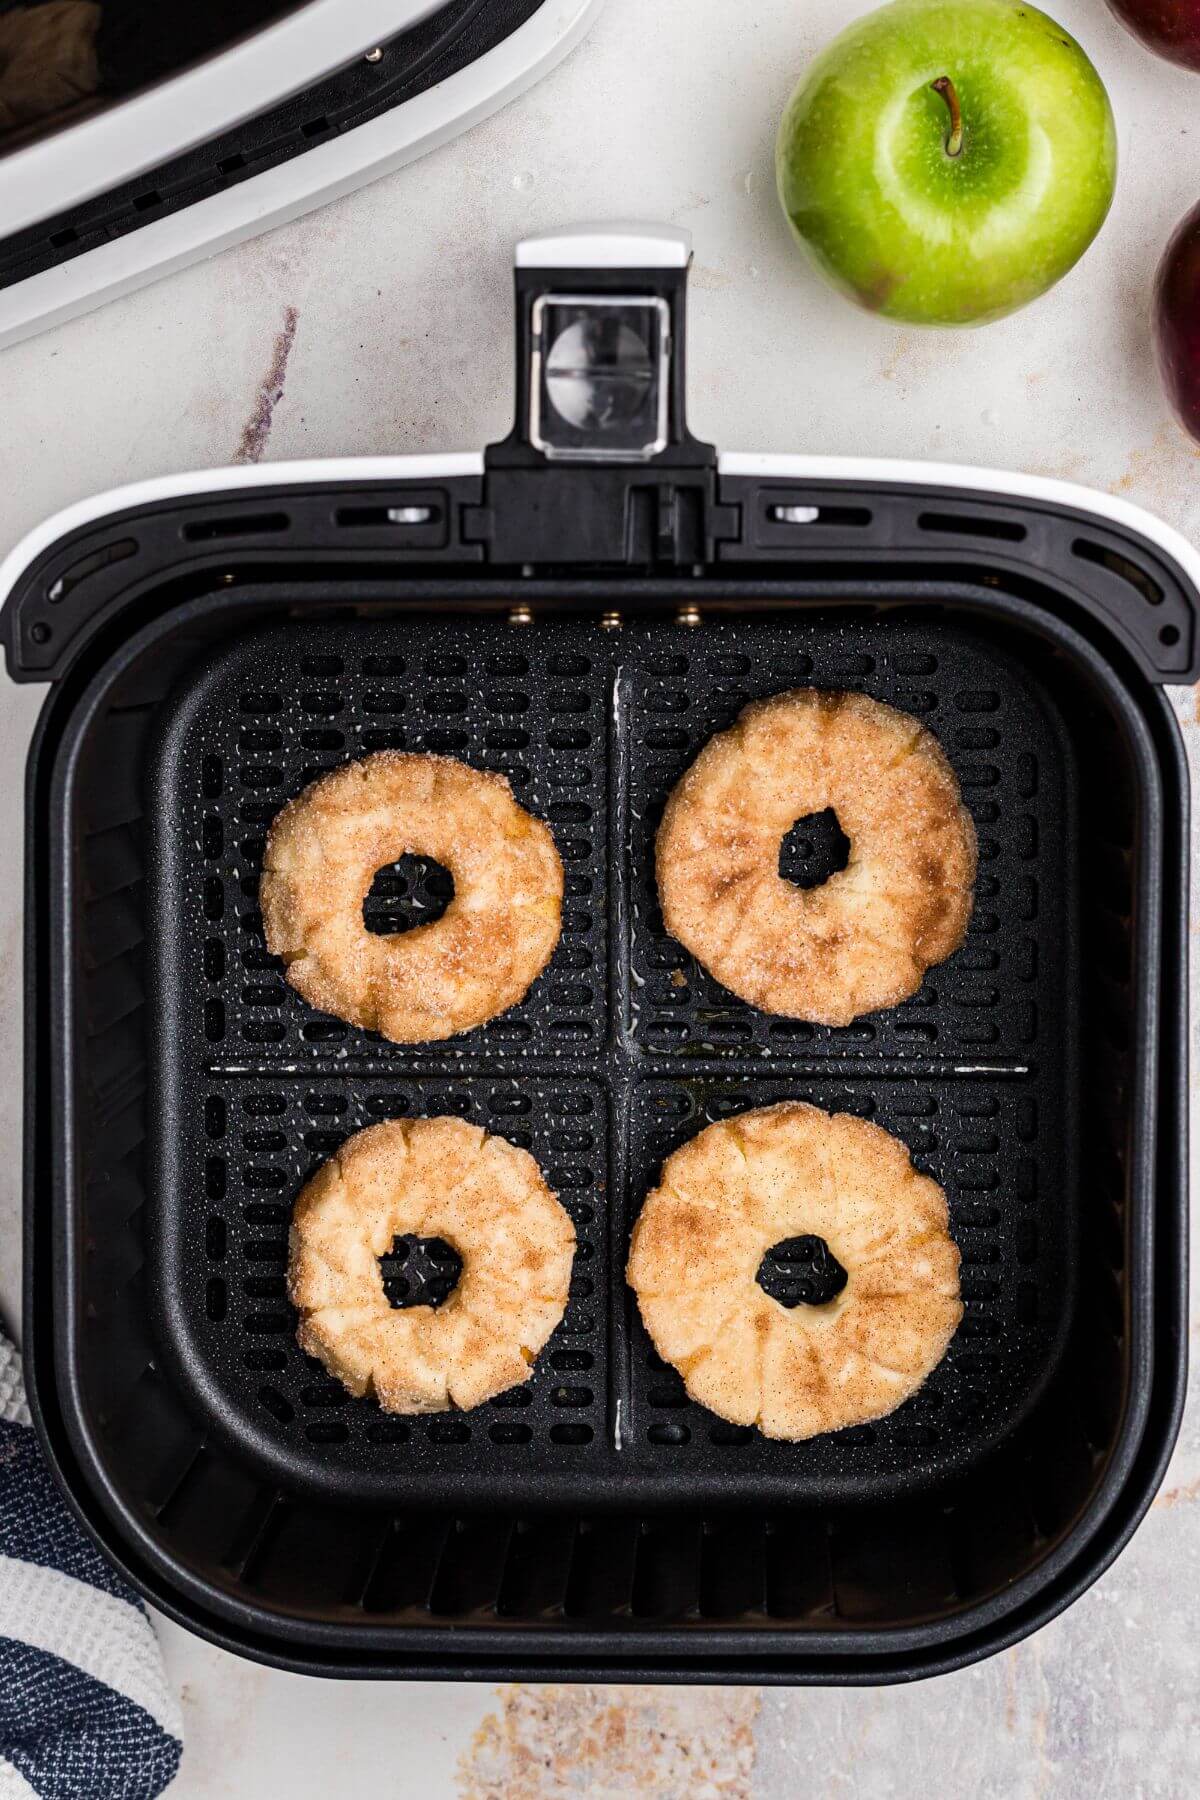 Apple rings wrapped in pastry dough, in the air fryer basket before cooking. 